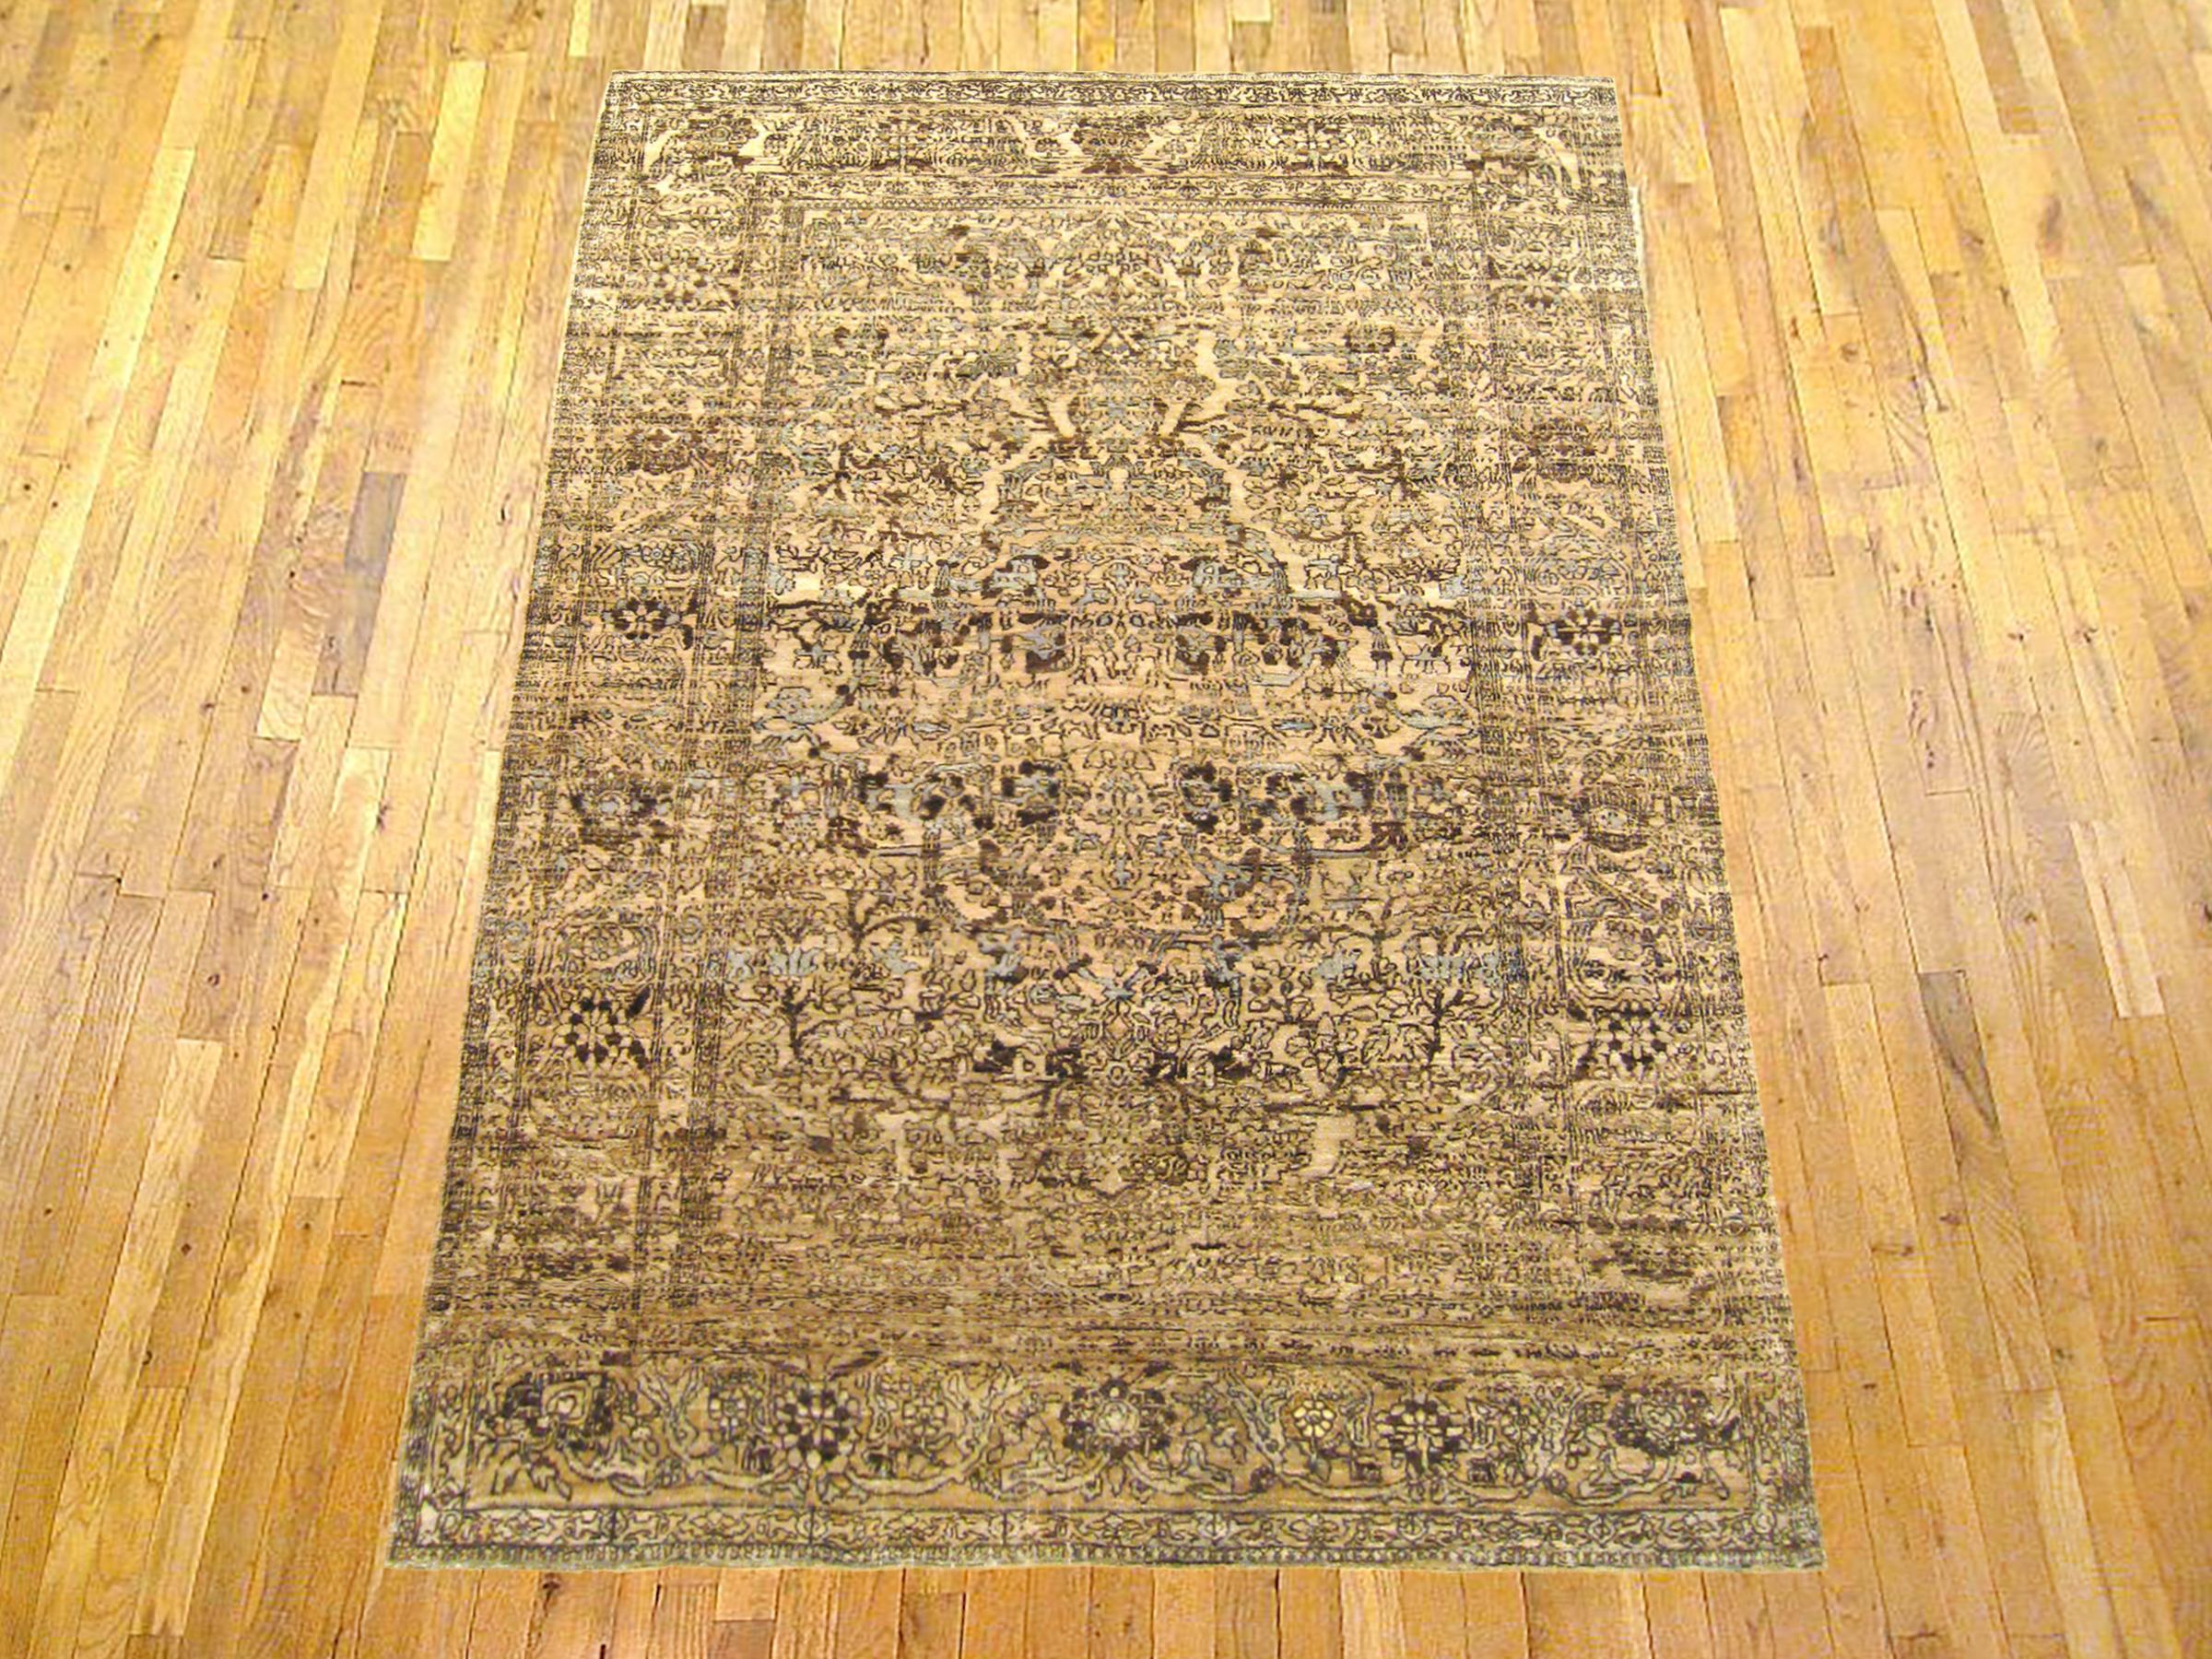 Antique Persian Isphahan rug, small size, circa 1920.

A one-of-a-kind antique Persian Isphahan Oriental Carpet, hand-knotted with soft wool pile. This lovely hand-knotted wool rug features floral elements allover the ivory field, within an ivory